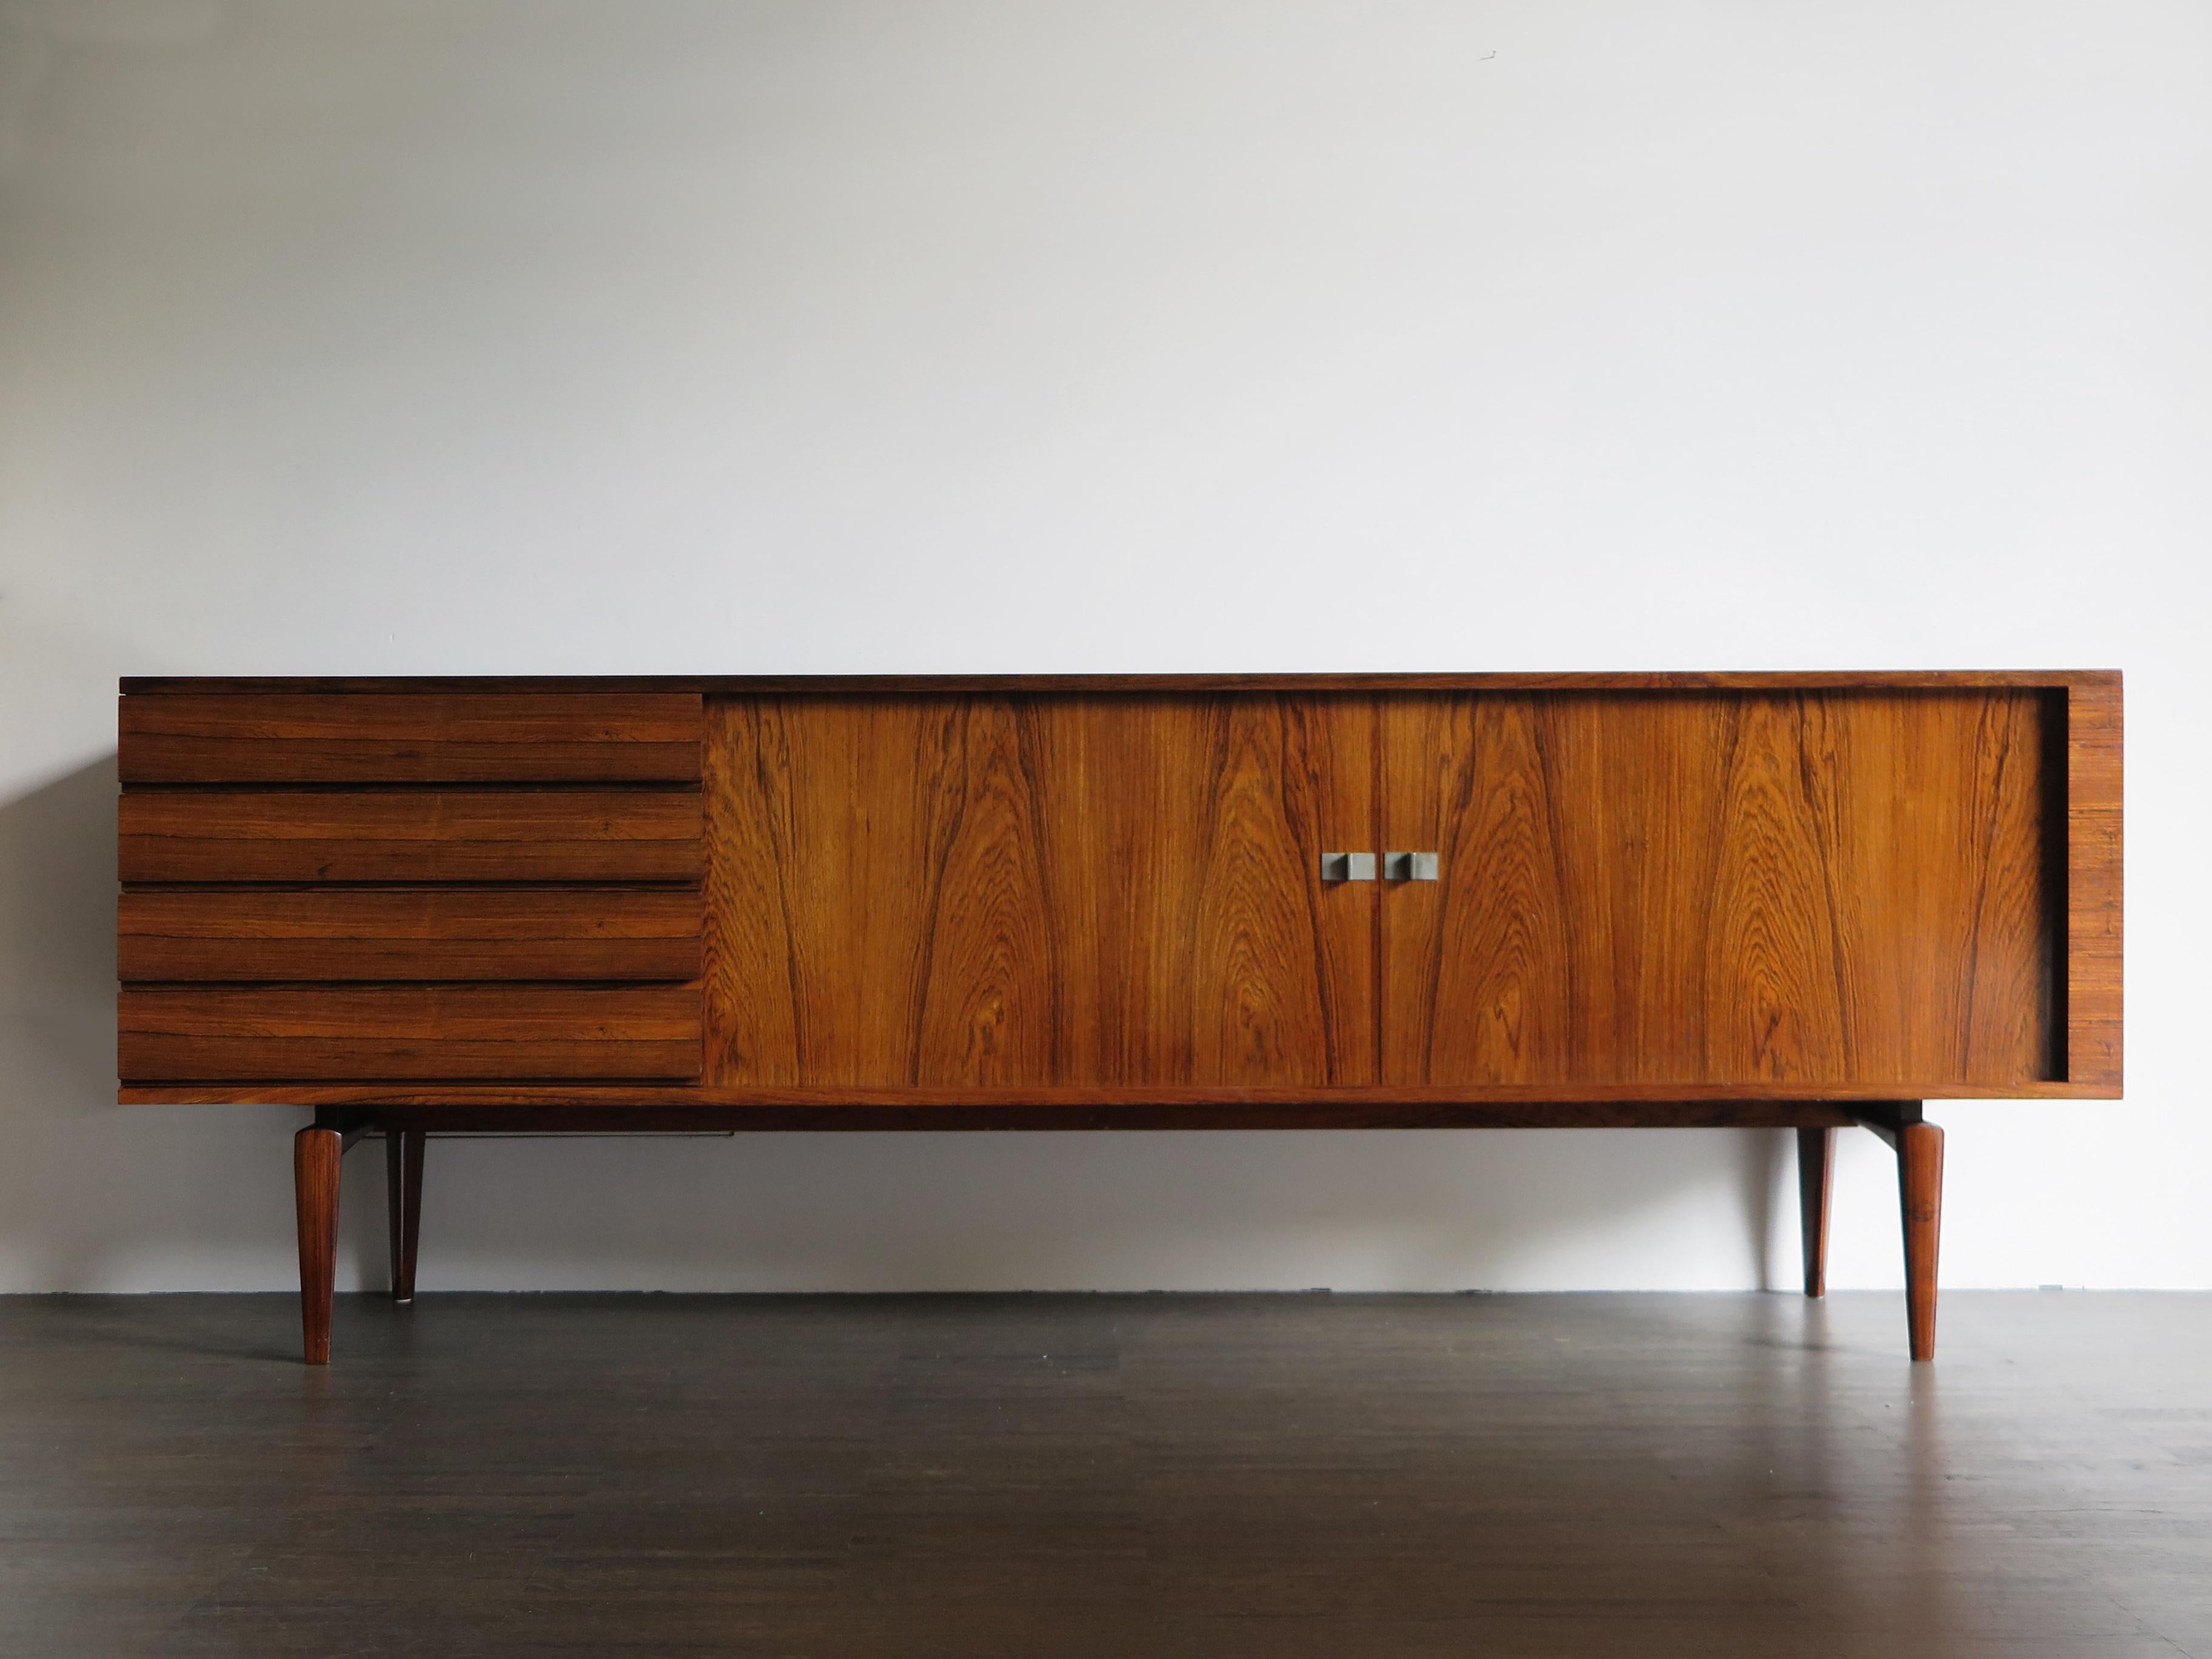 Scandinavian Mid-Century Modern design dark wood sideboard designed by Henry Walther Klein and produced by Bramin Mobelfabrik with two sliding doors and four chest of drawers, Denmark 1950s.

Please note that the sideboard is original of the